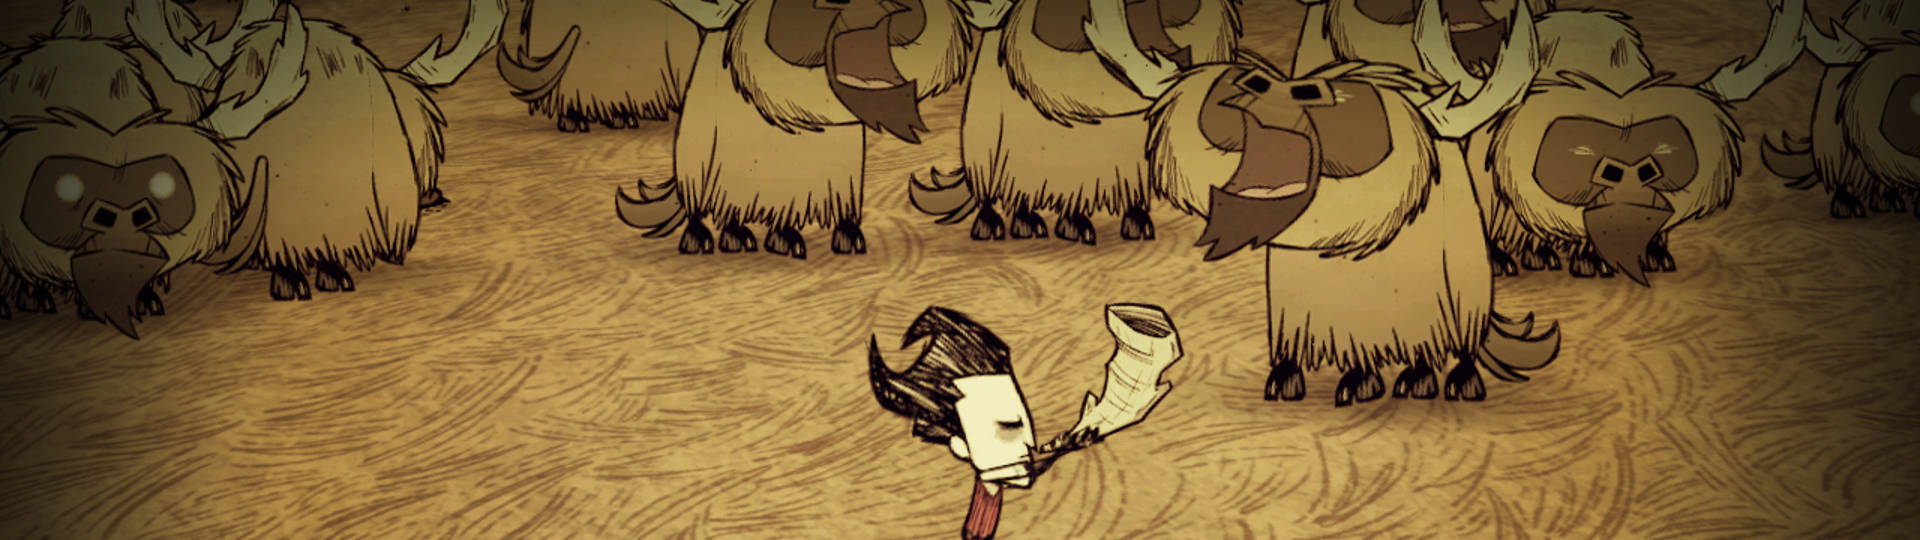 Klei Entertainment Tencent investment Don't Starve slice